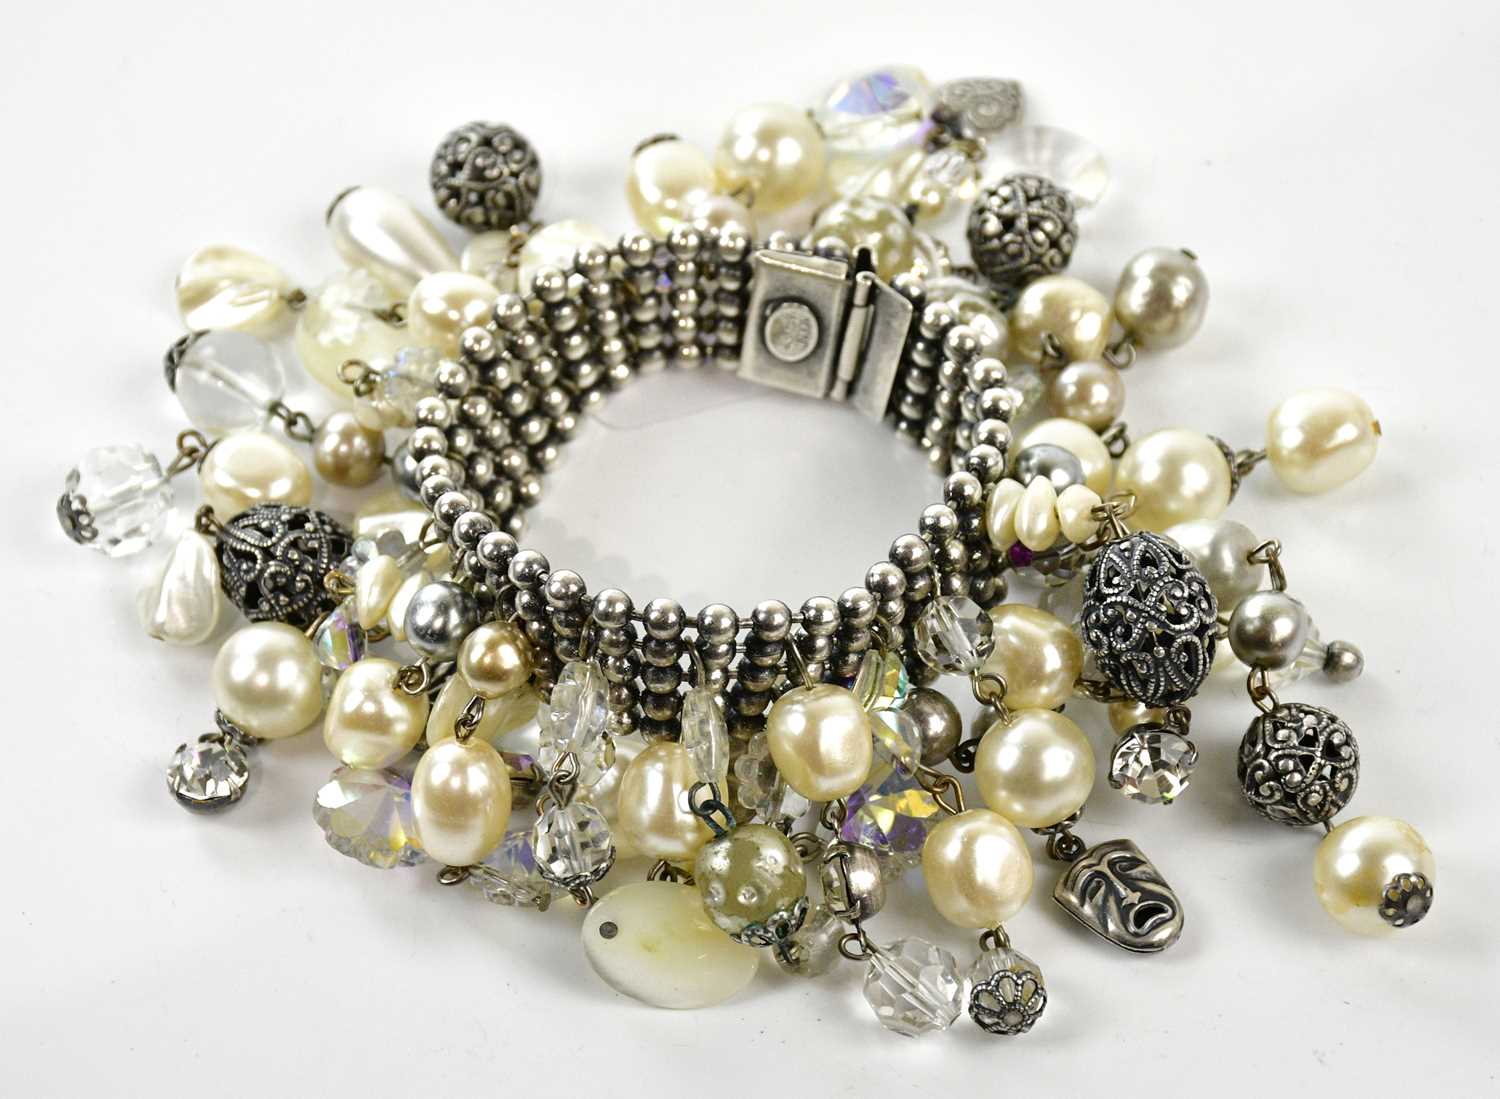 ASKEW, LONDON; a silver tone five strand ball bead bracelet with faux pearls, glass crystal and